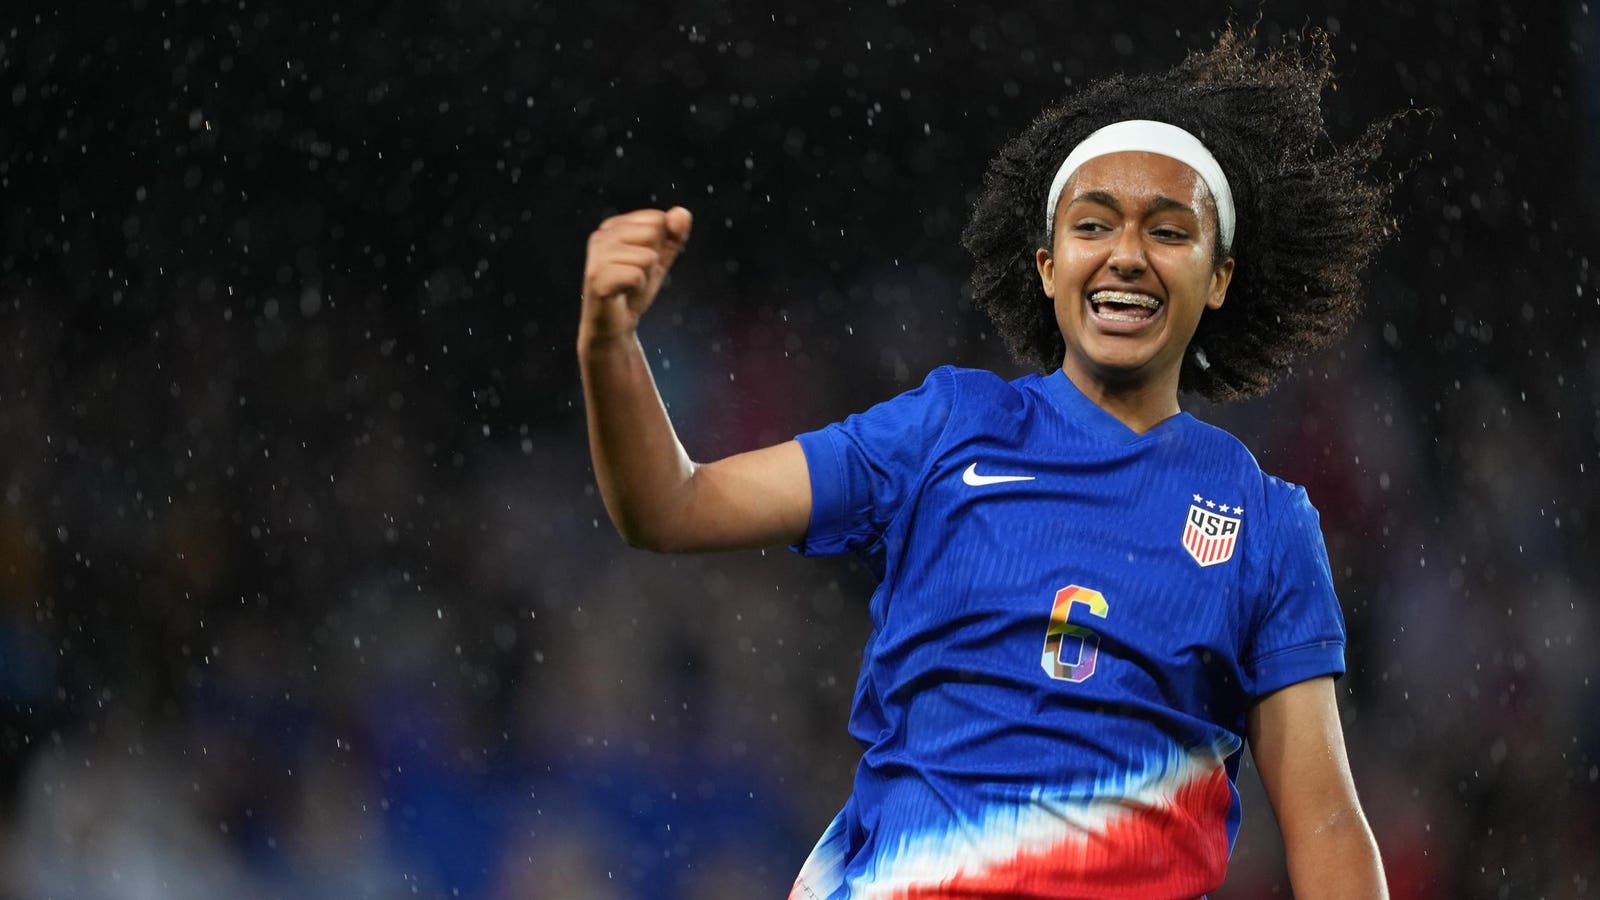 Lily Yohannes, 16, Scores In Her U.S Women’s Soccer Team Debut: What We Know About Her